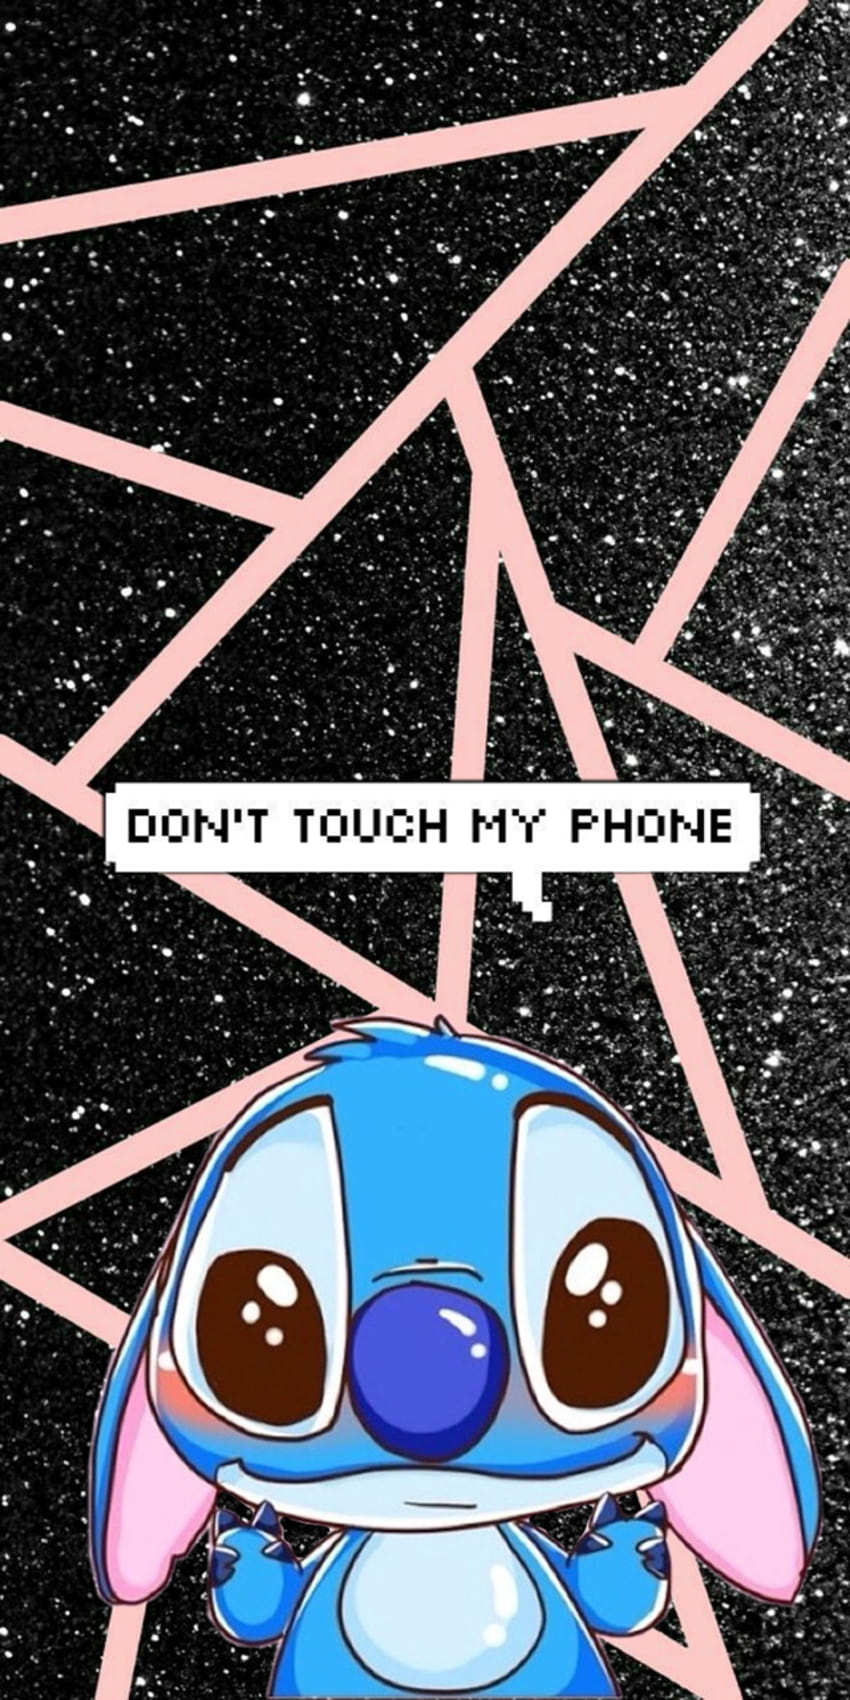 100 Don't Touch My Phone trending, girlish written dont touch my phone ...